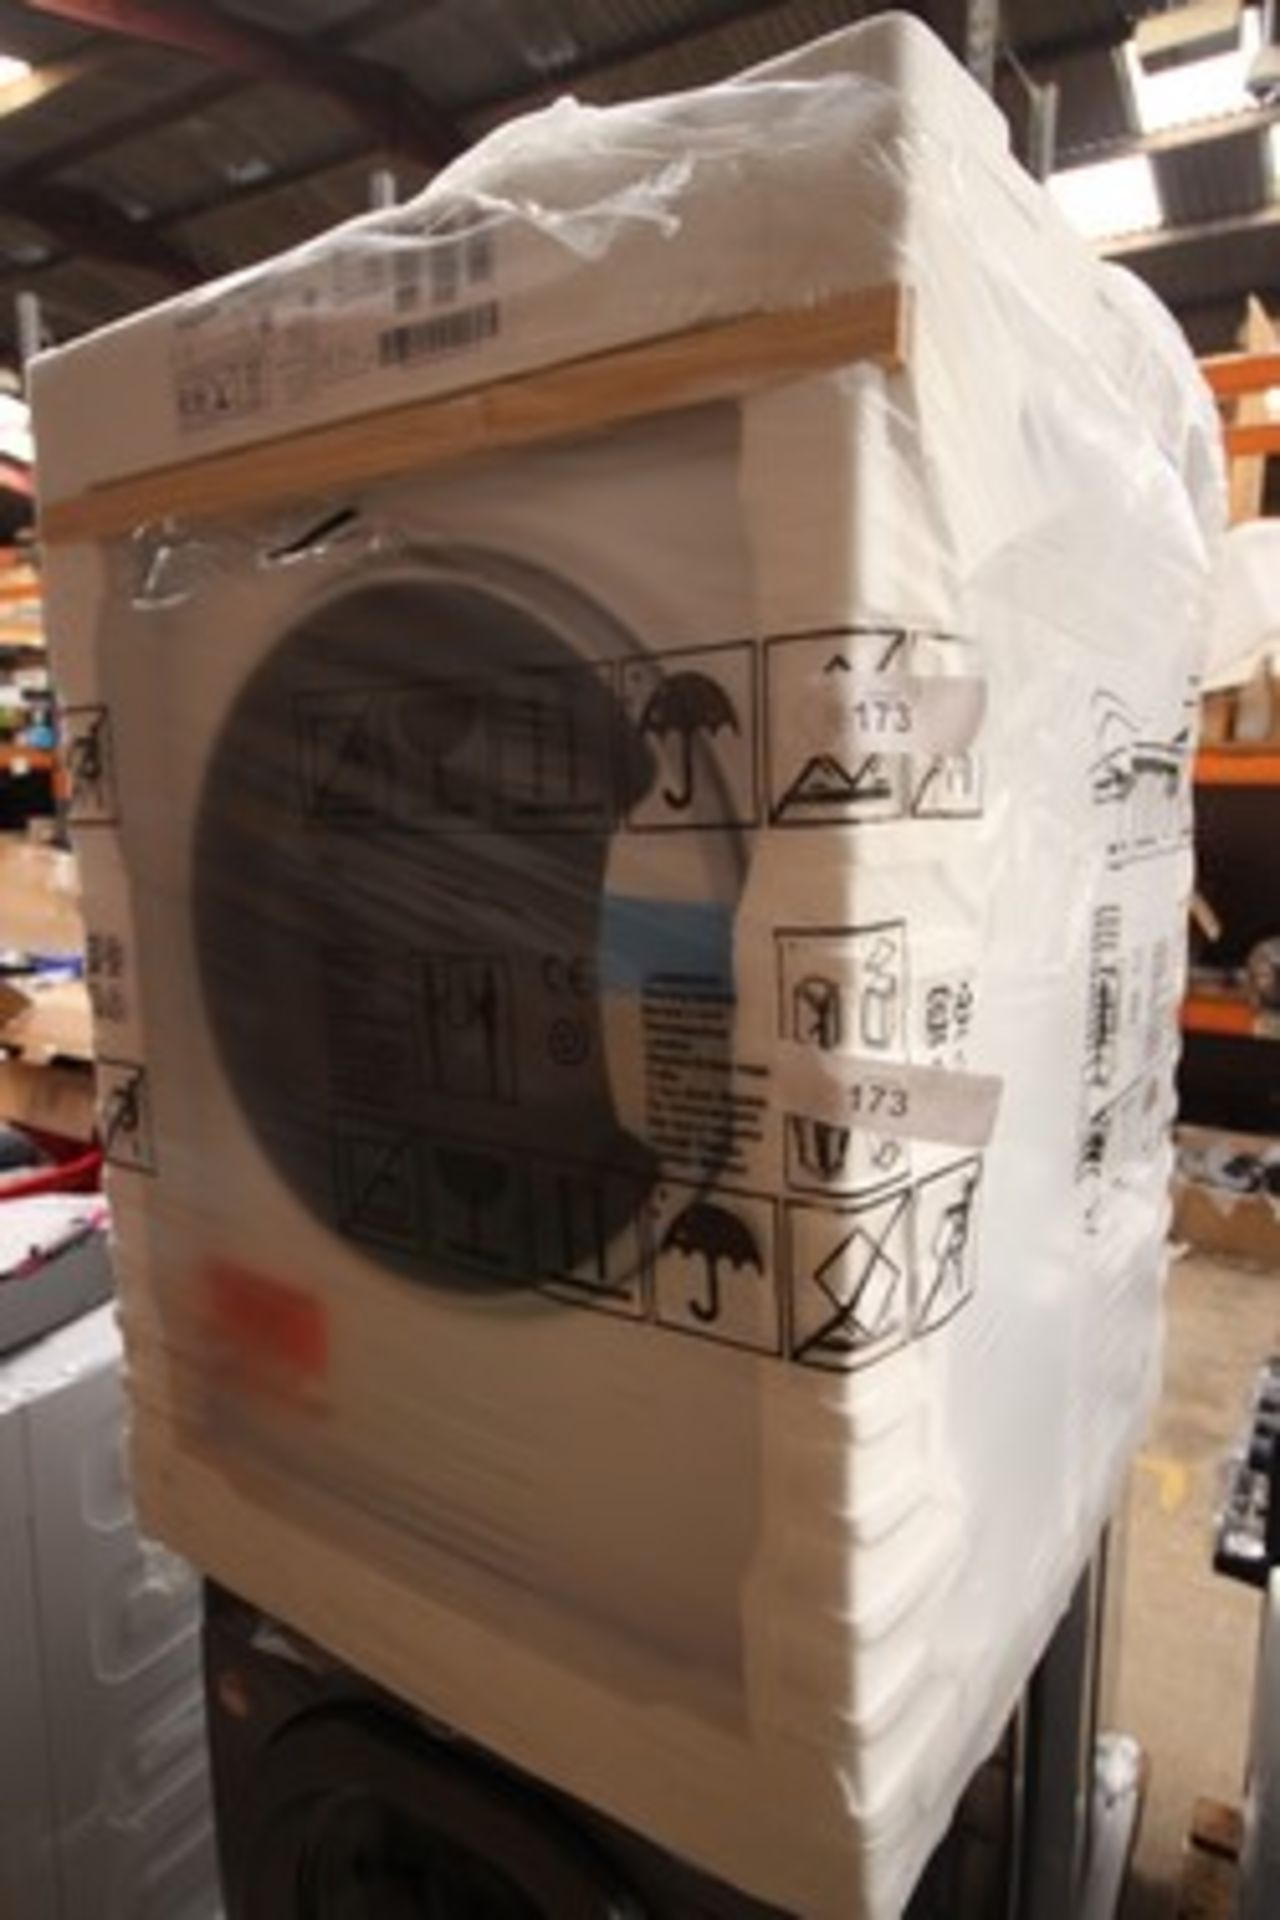 1 x Hotpoint 8kg washing machine, Model NSWE845CWSUKN, 4cm scratch/dent on right side panel - New in